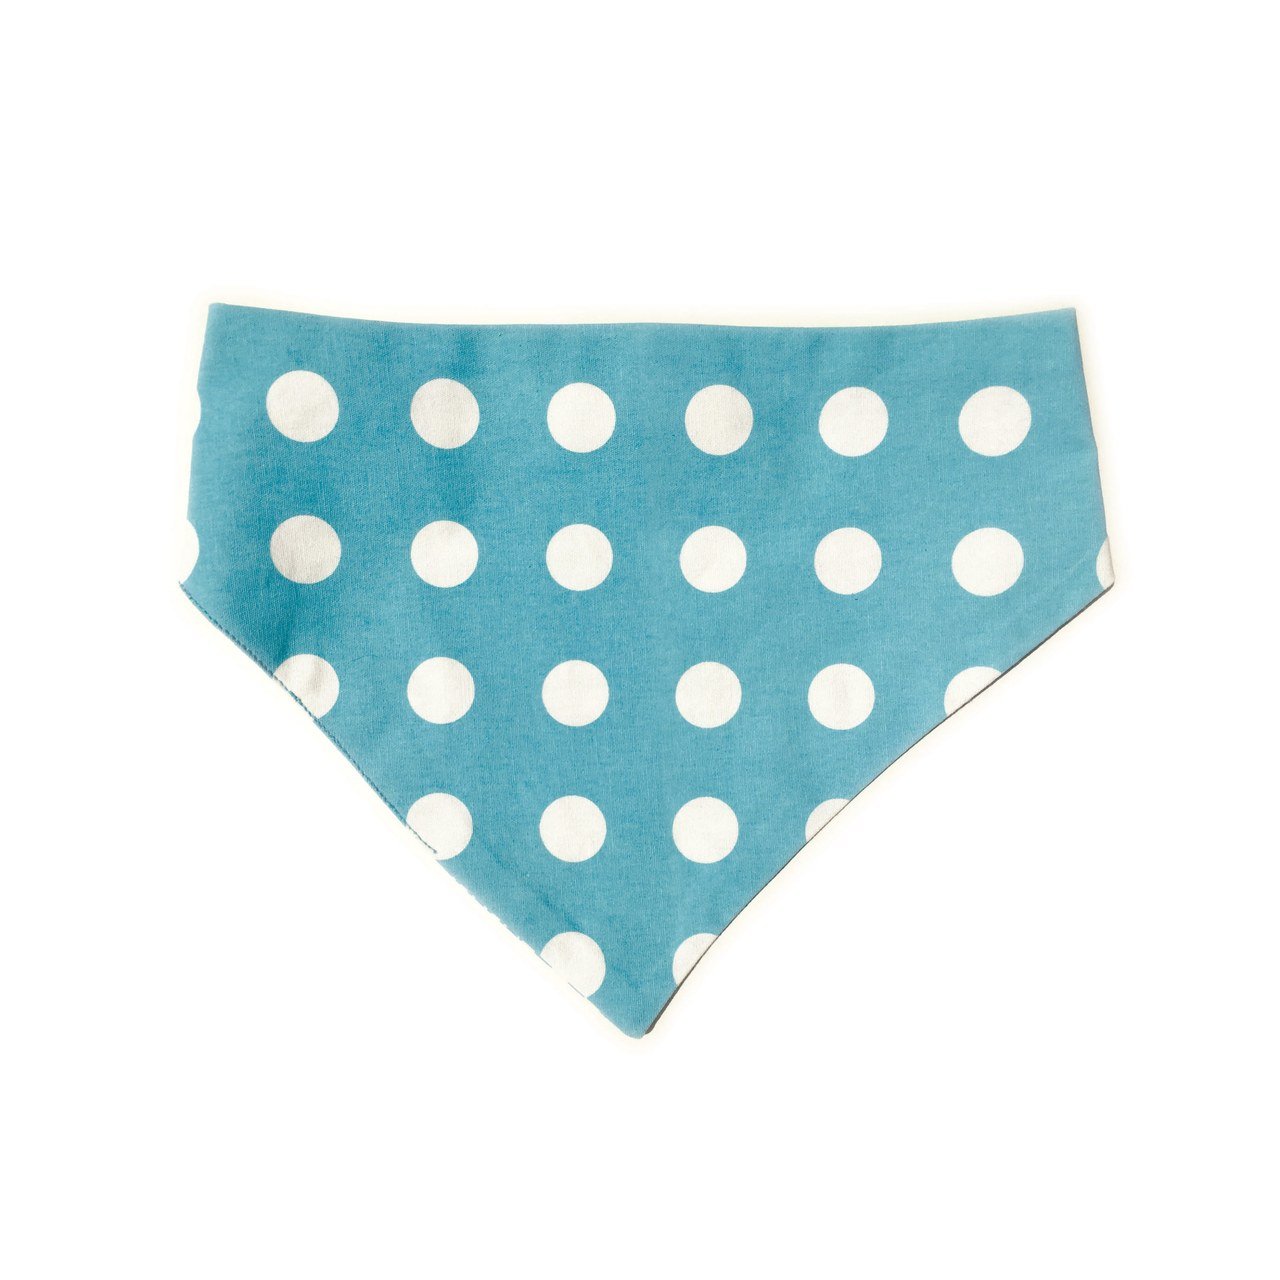 Uptown Pups Reversible Bandana – Baby Blue Houndstooth - Uptown Pups